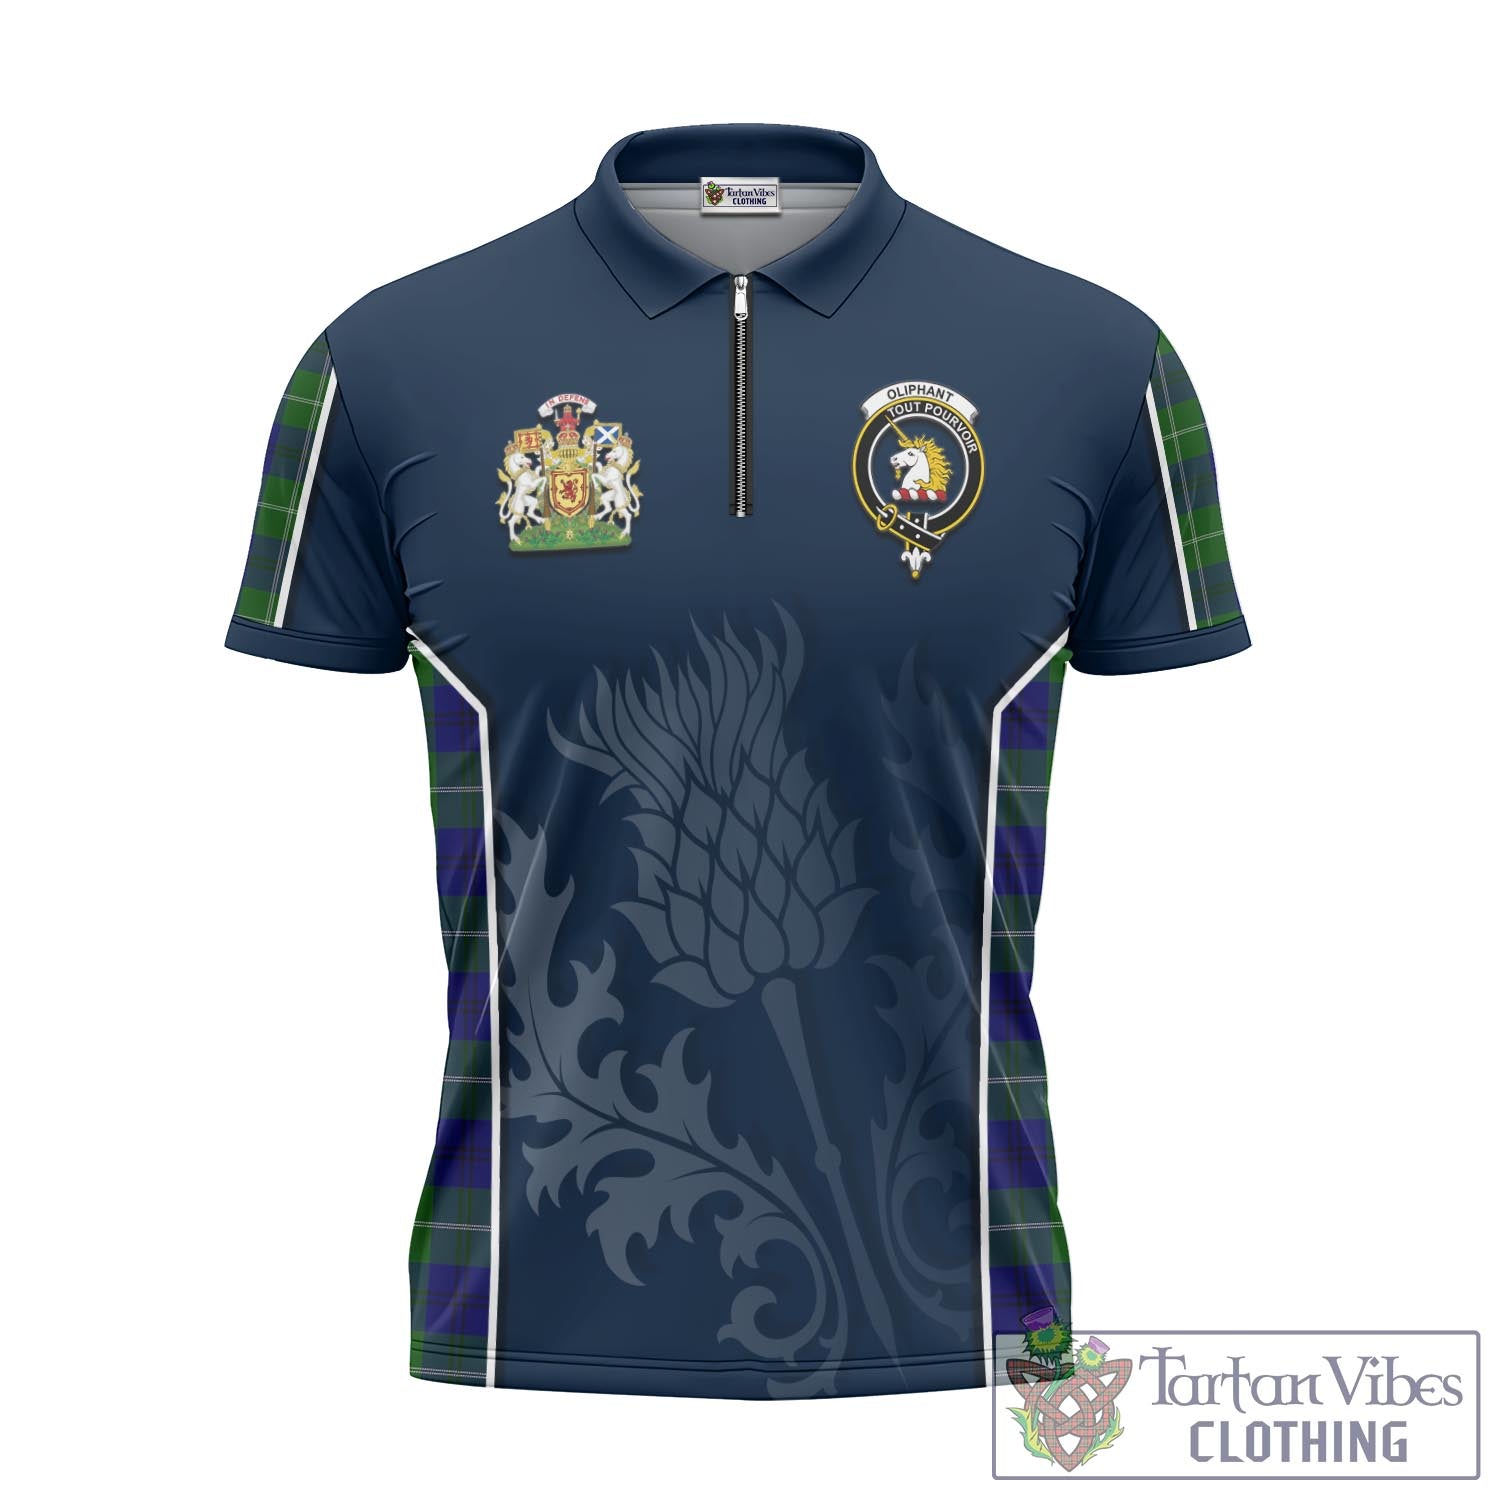 Tartan Vibes Clothing Oliphant Modern Tartan Zipper Polo Shirt with Family Crest and Scottish Thistle Vibes Sport Style